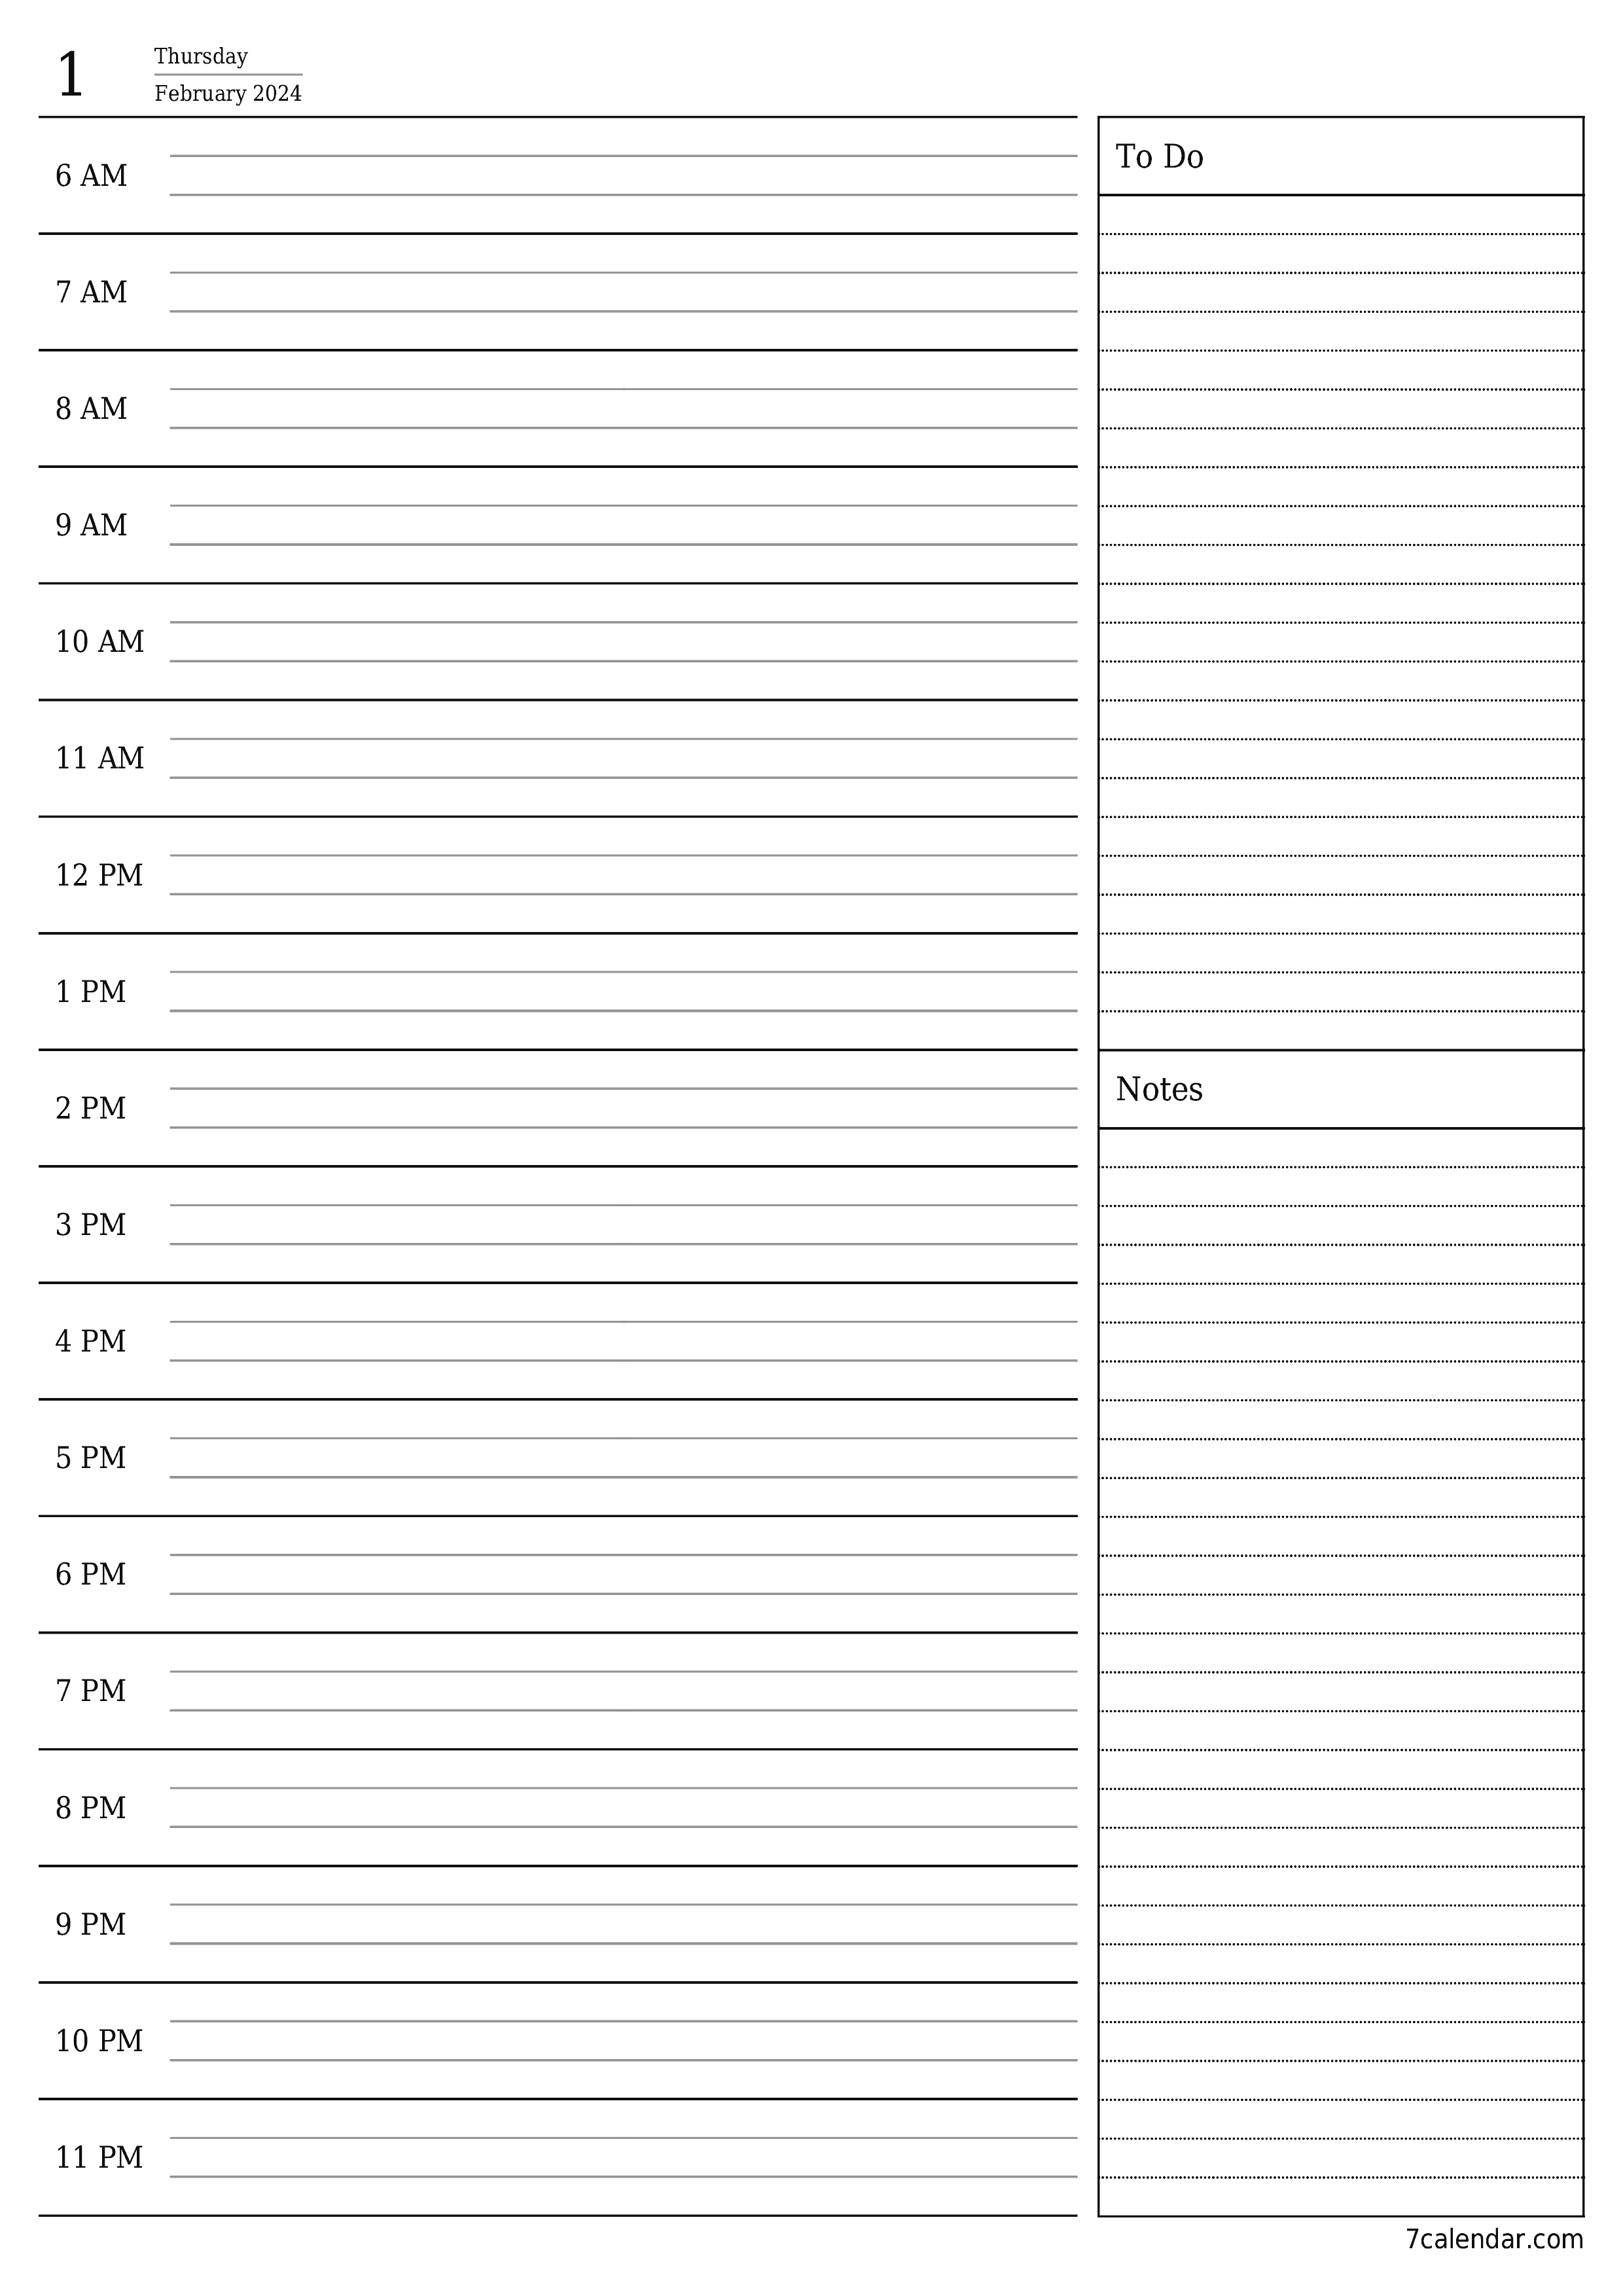 printable wall template free vertical Daily planner calendar February (Feb) 2024